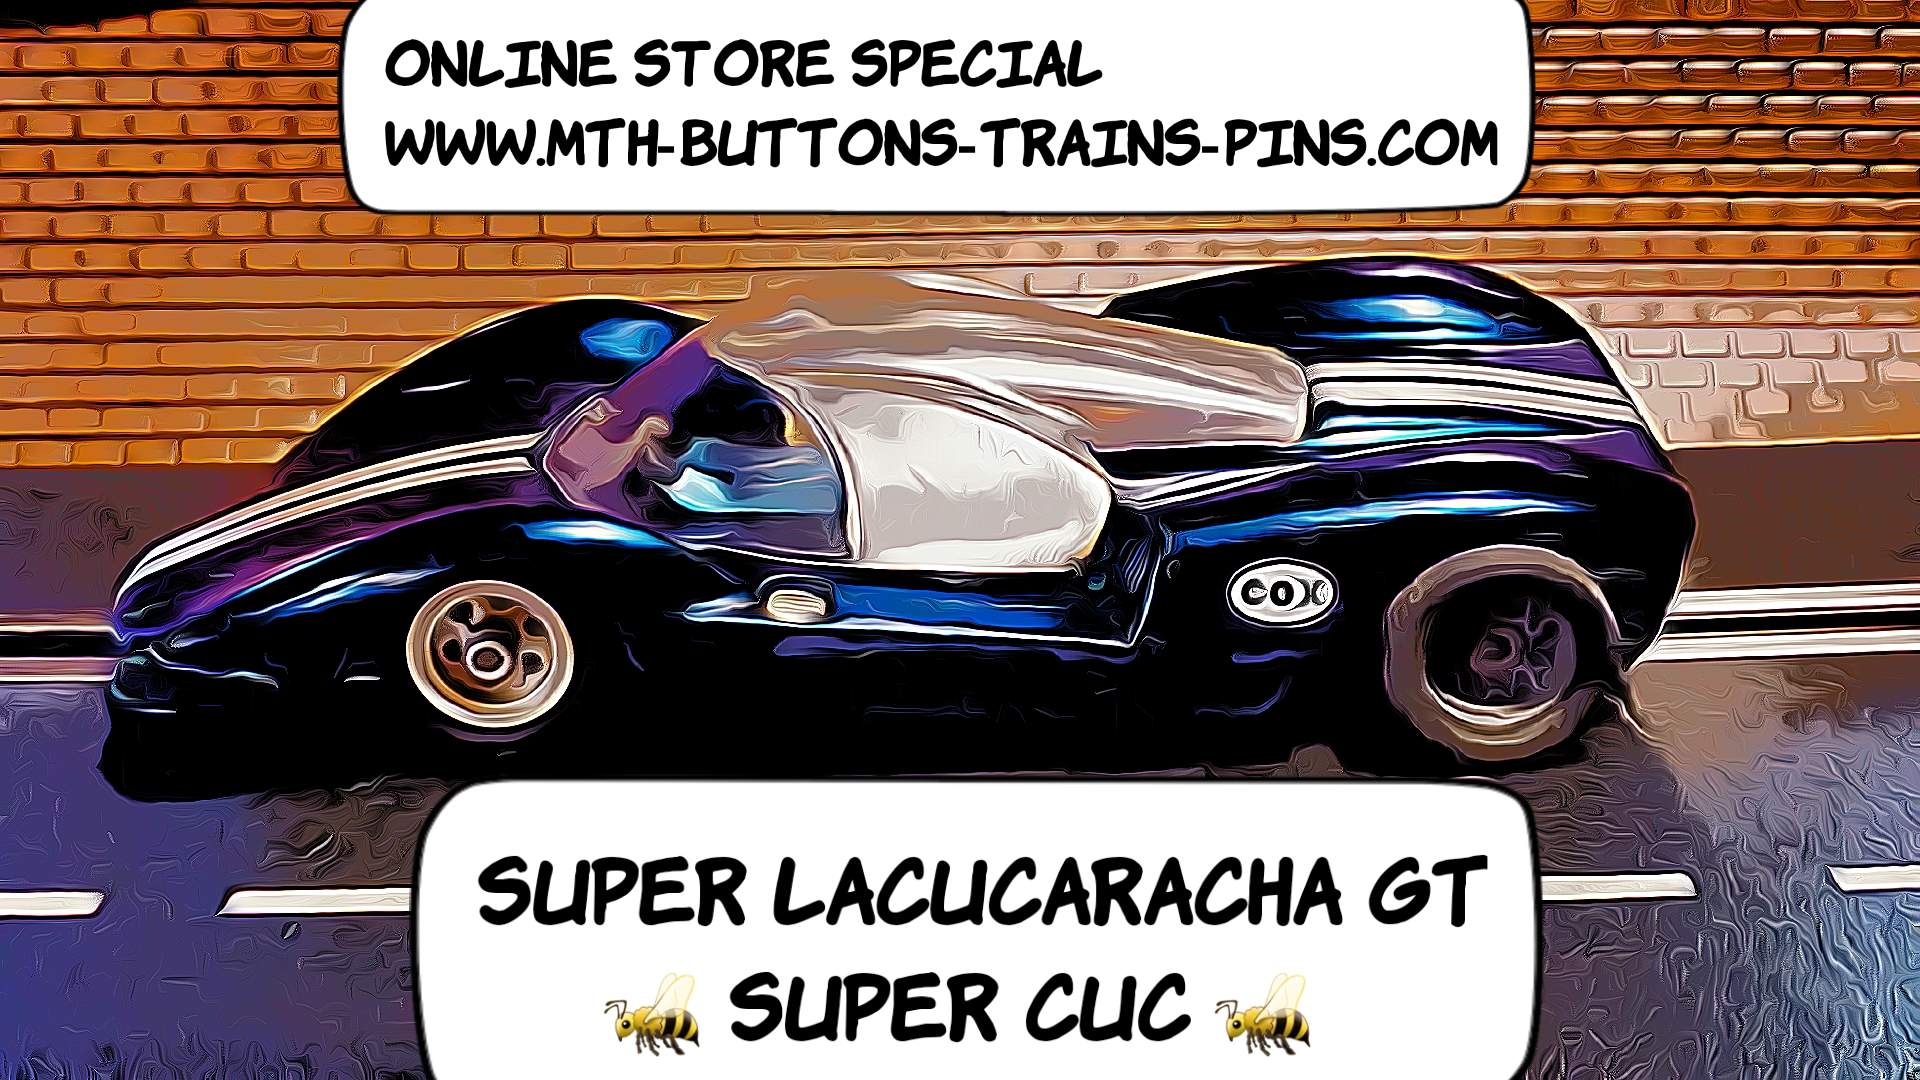 * SOLD 11-11-23 * *Exclusive Offer SAVE $200 off our Ebay Store Price* COX Super La Cucaracha “Super Cuc” 1:24 Scale Slot Car, Nicely Restored 